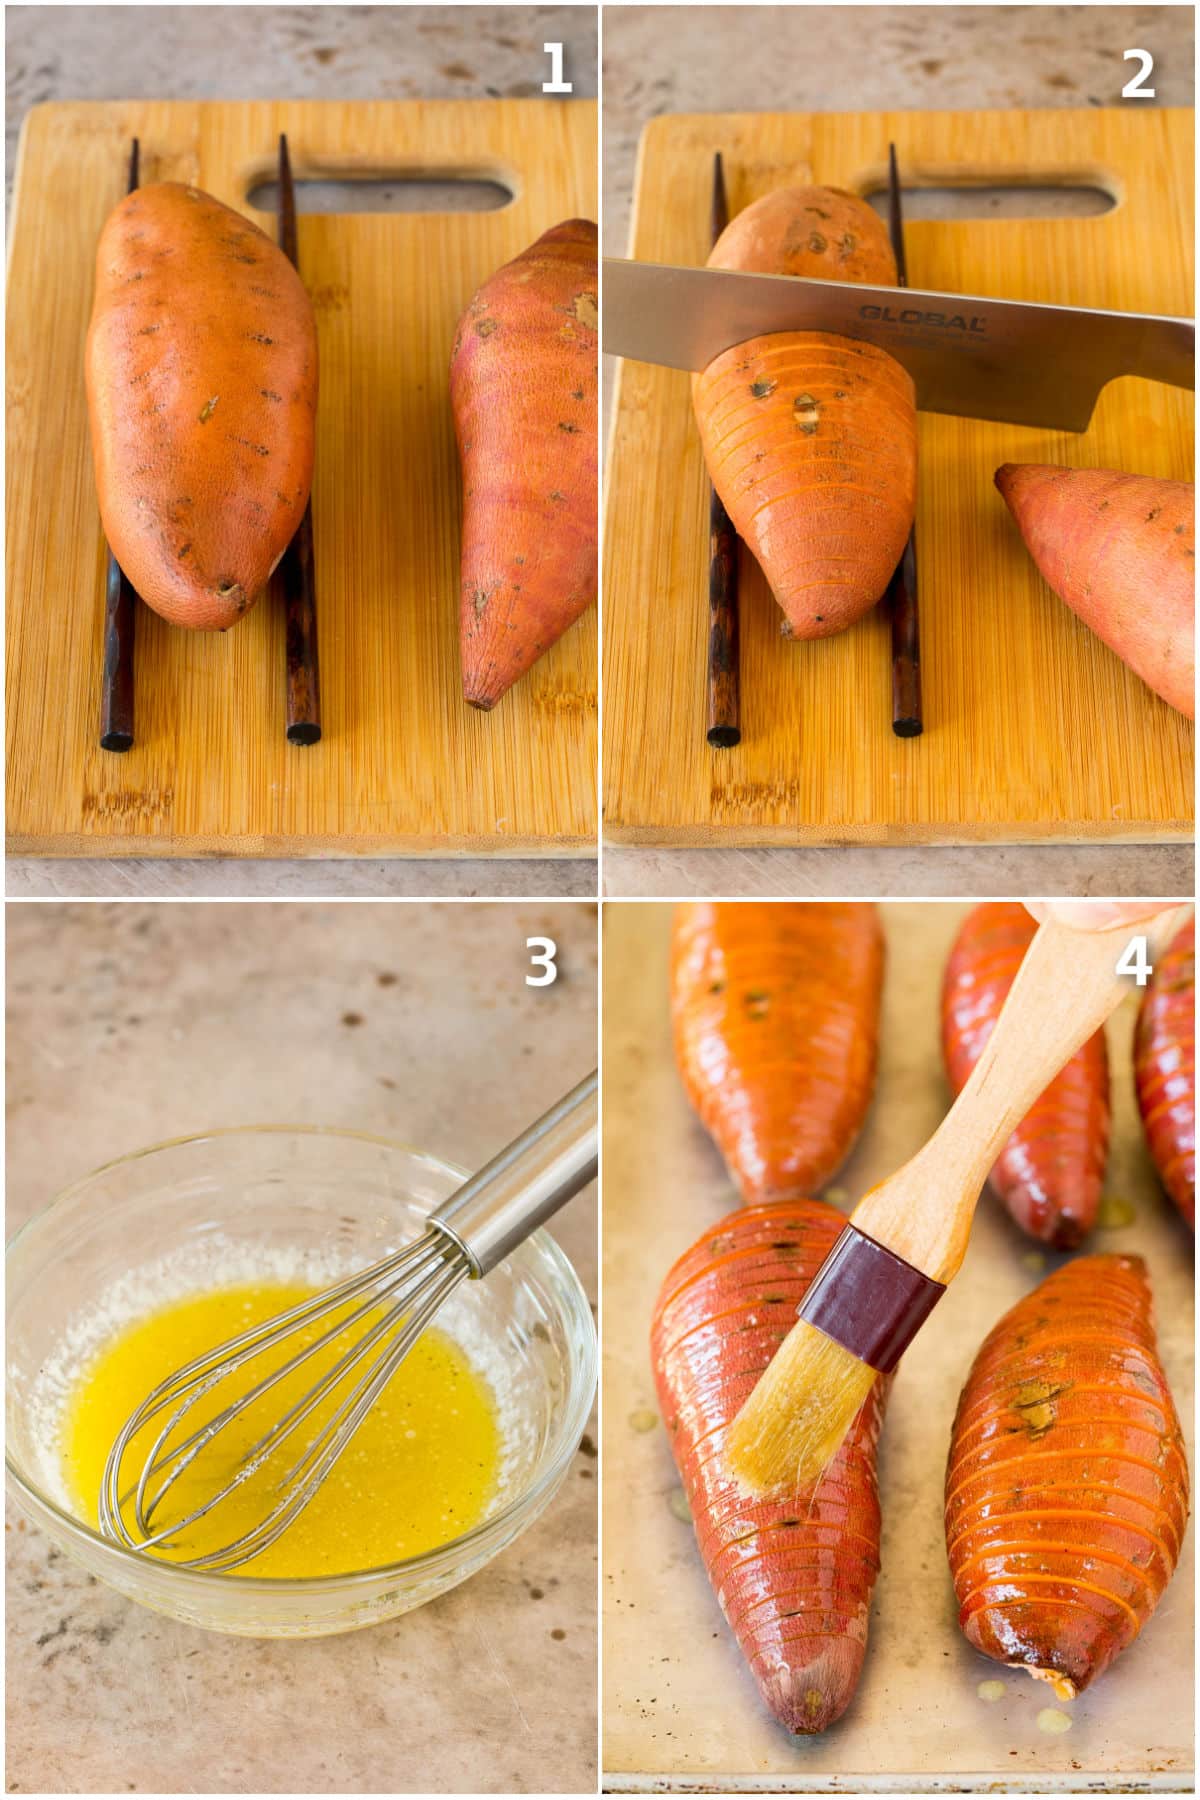 Step by step process shots showing how to thinly slice a sweet potato.